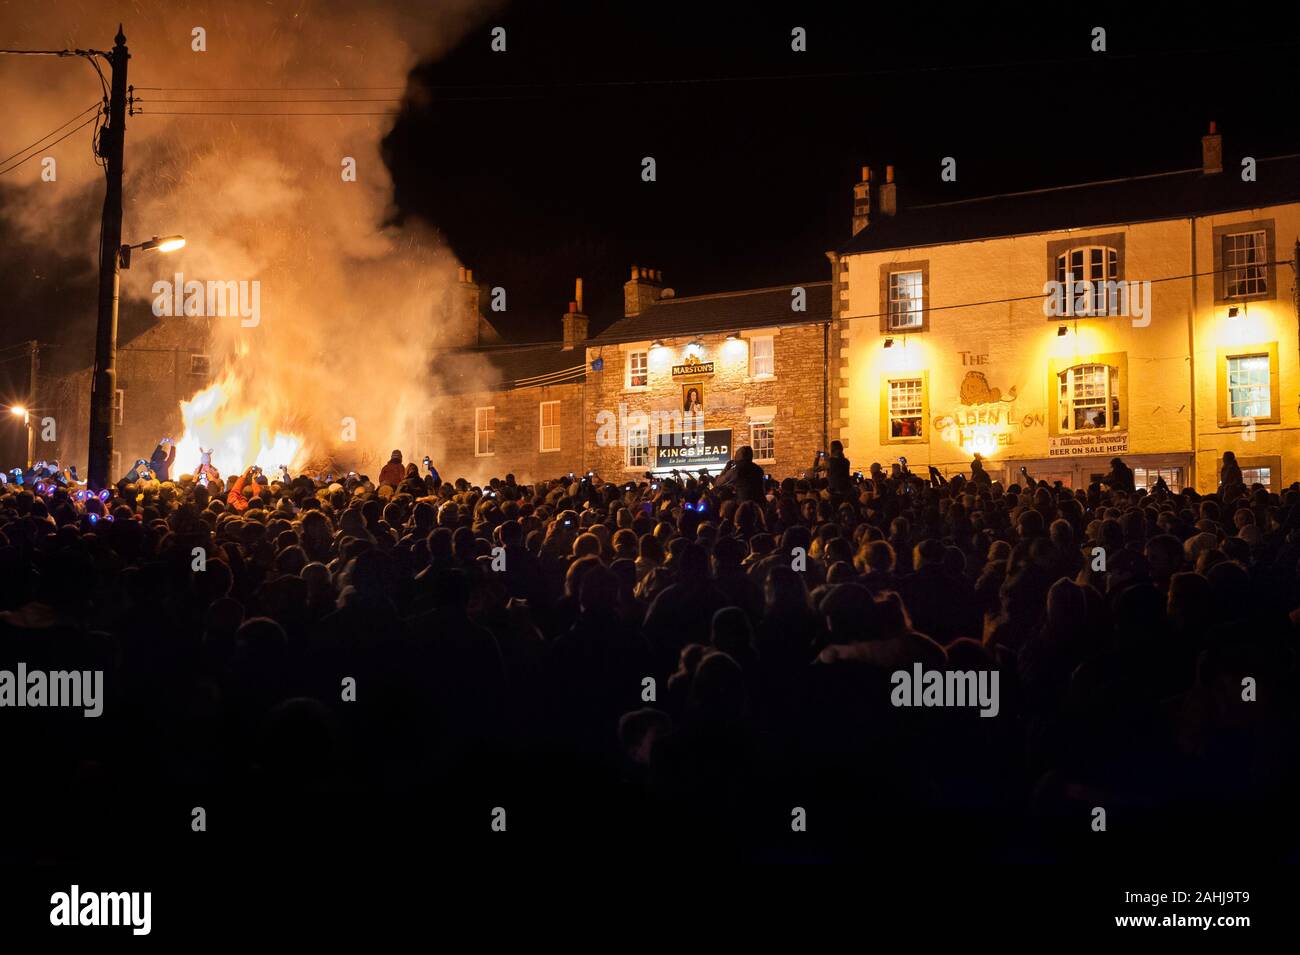 Crowds at bonfire celebrate New Year at Allendale New Year's Eve Tar Bar'l ceremony where burning Tar Barrels are carried and thrown on to the fire. Stock Photo